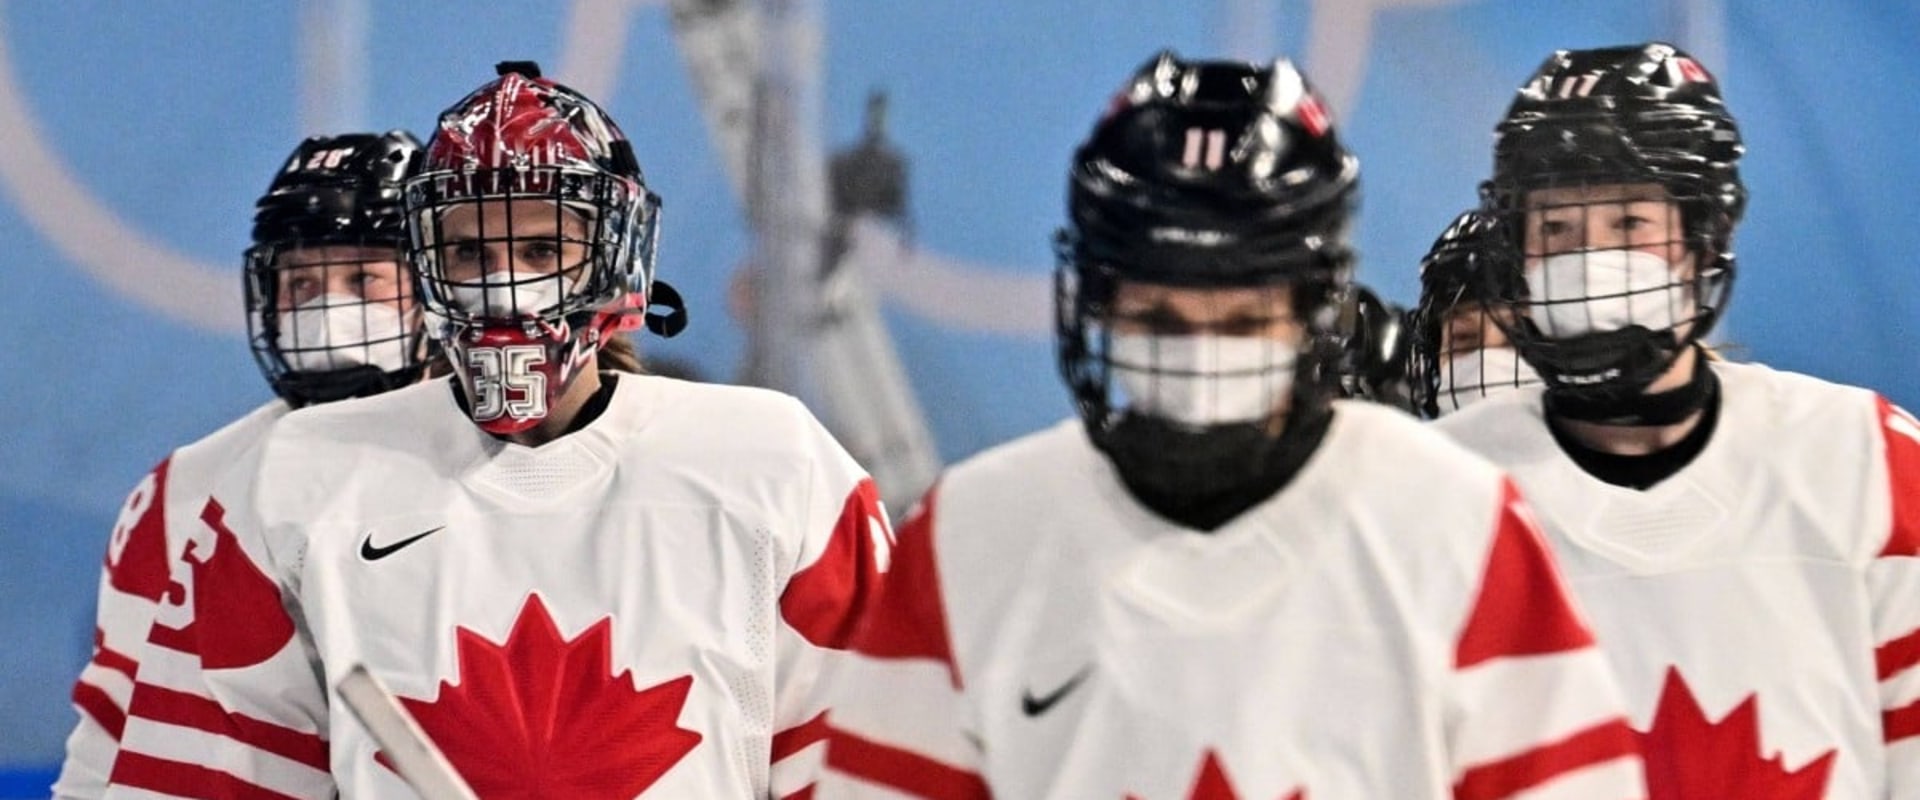 Why is Ice Hockey Canada's National Sport?